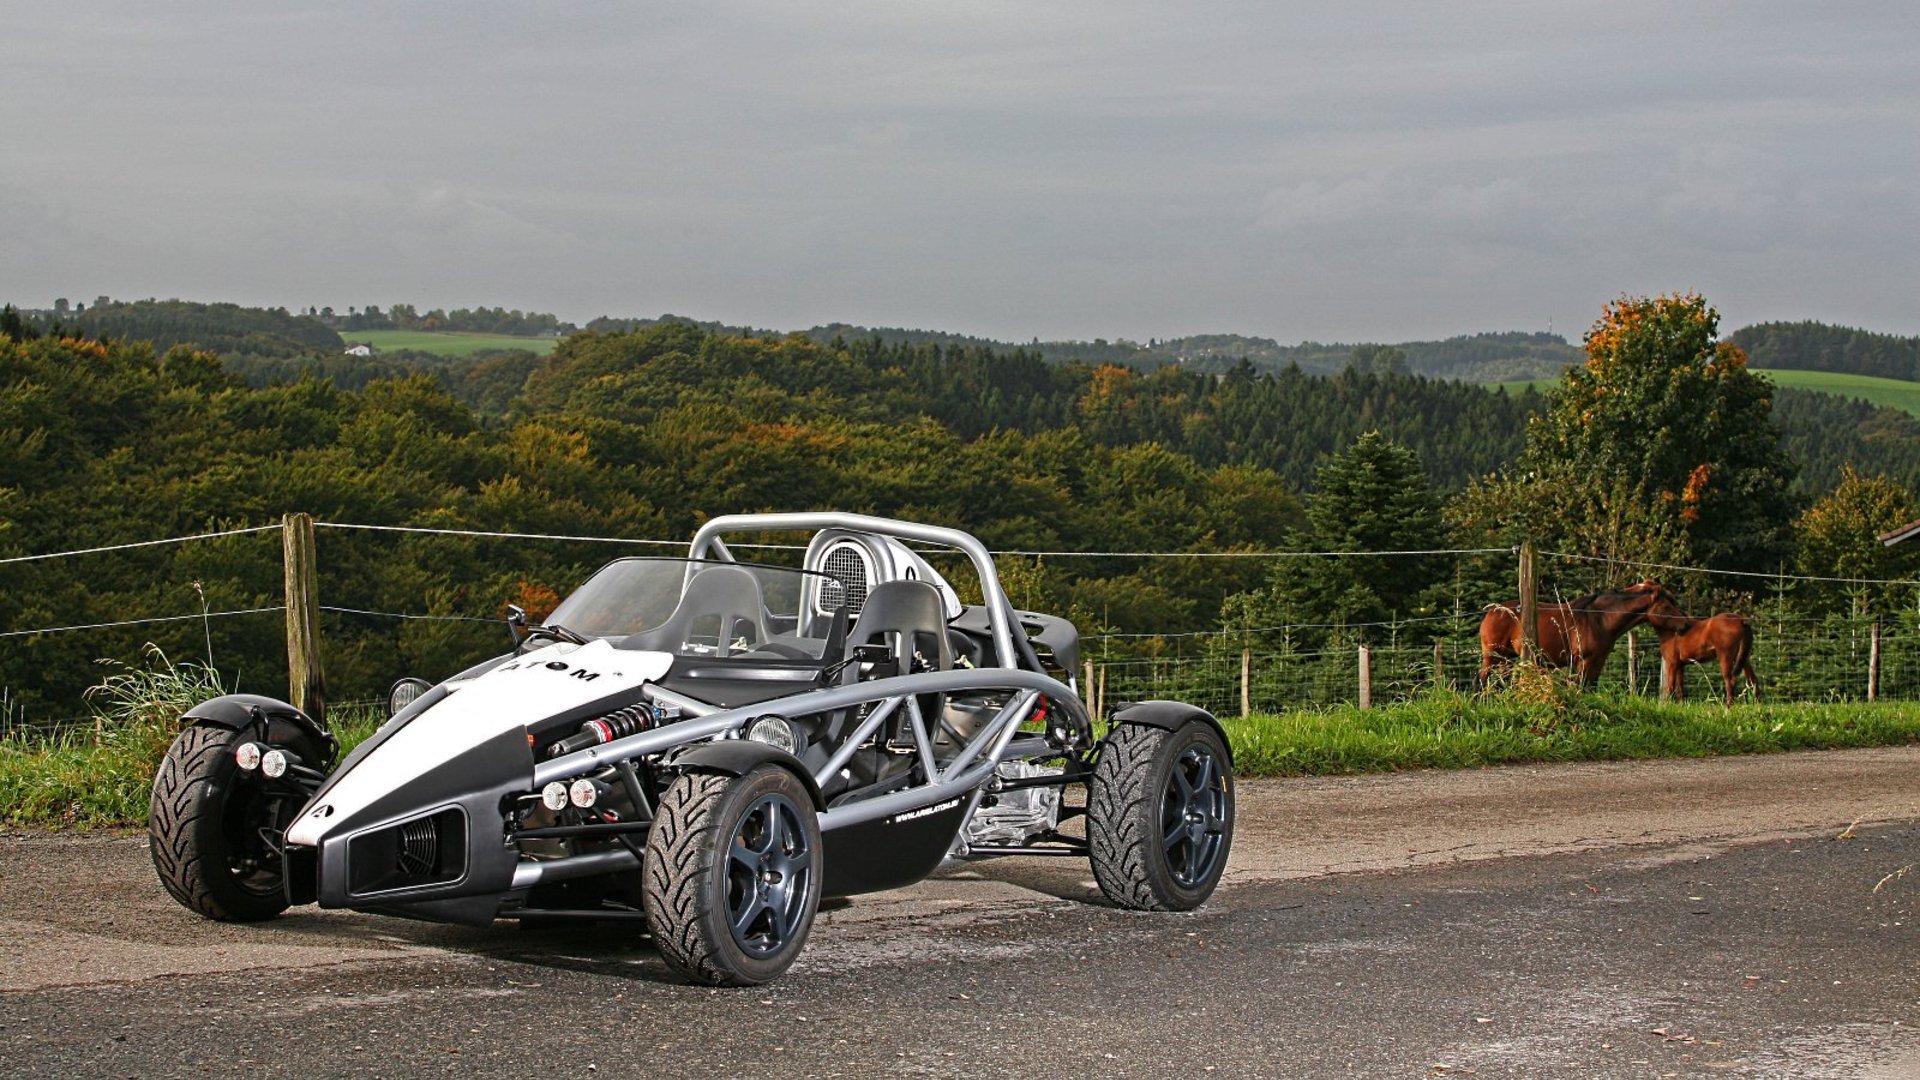 Awesome Ariel Atom free wallpaper ID:158175 for full hd 1920x1080 computer